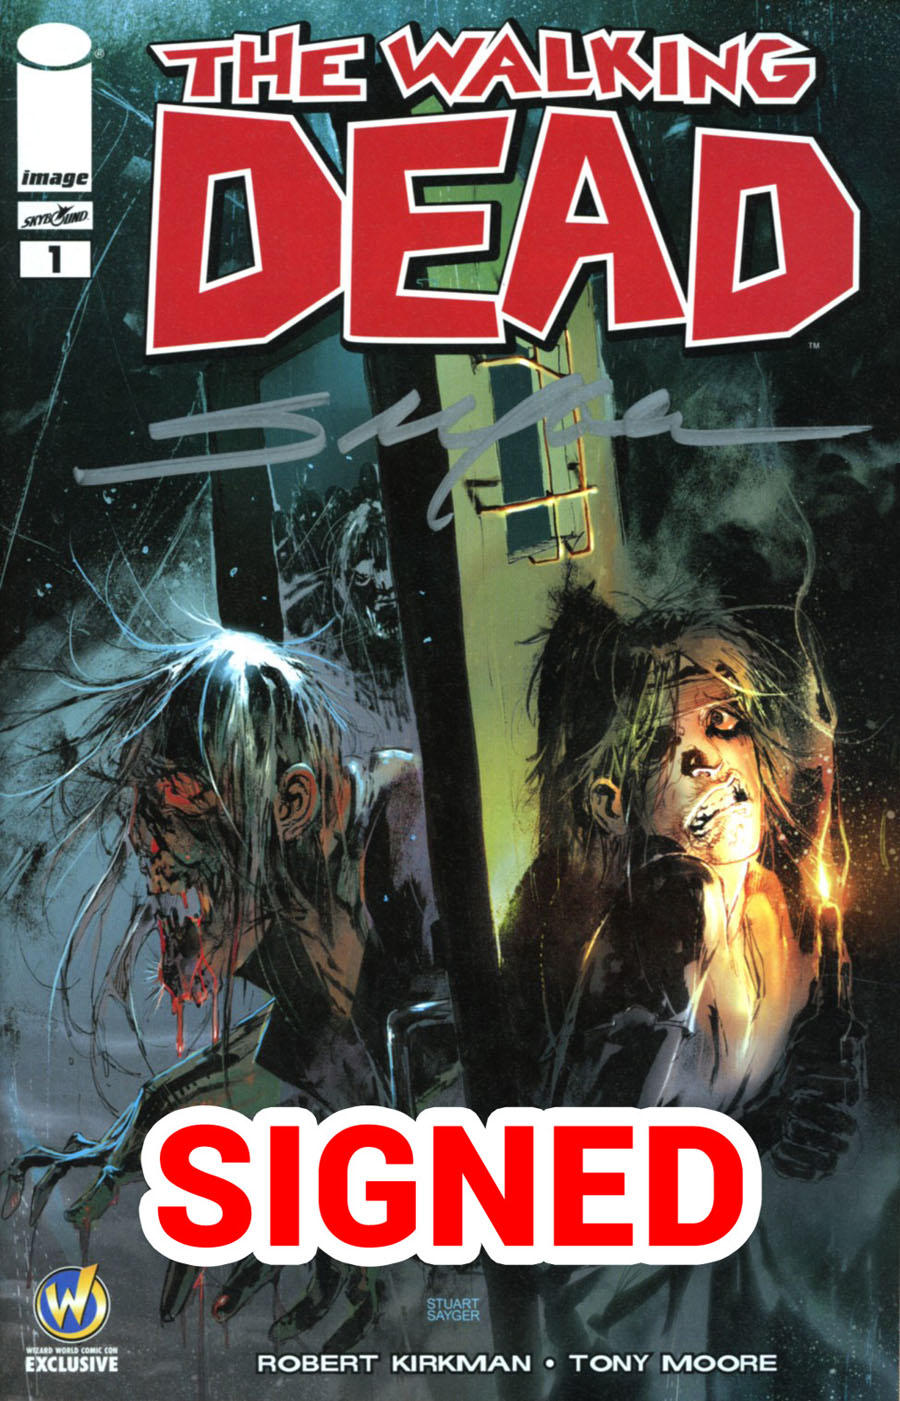 Walking Dead #1 Cover Z-B Wizard World Comic Con Columbus Exclusive Stuart Sayger Color Variant Cover Signed By Stuart Sayger